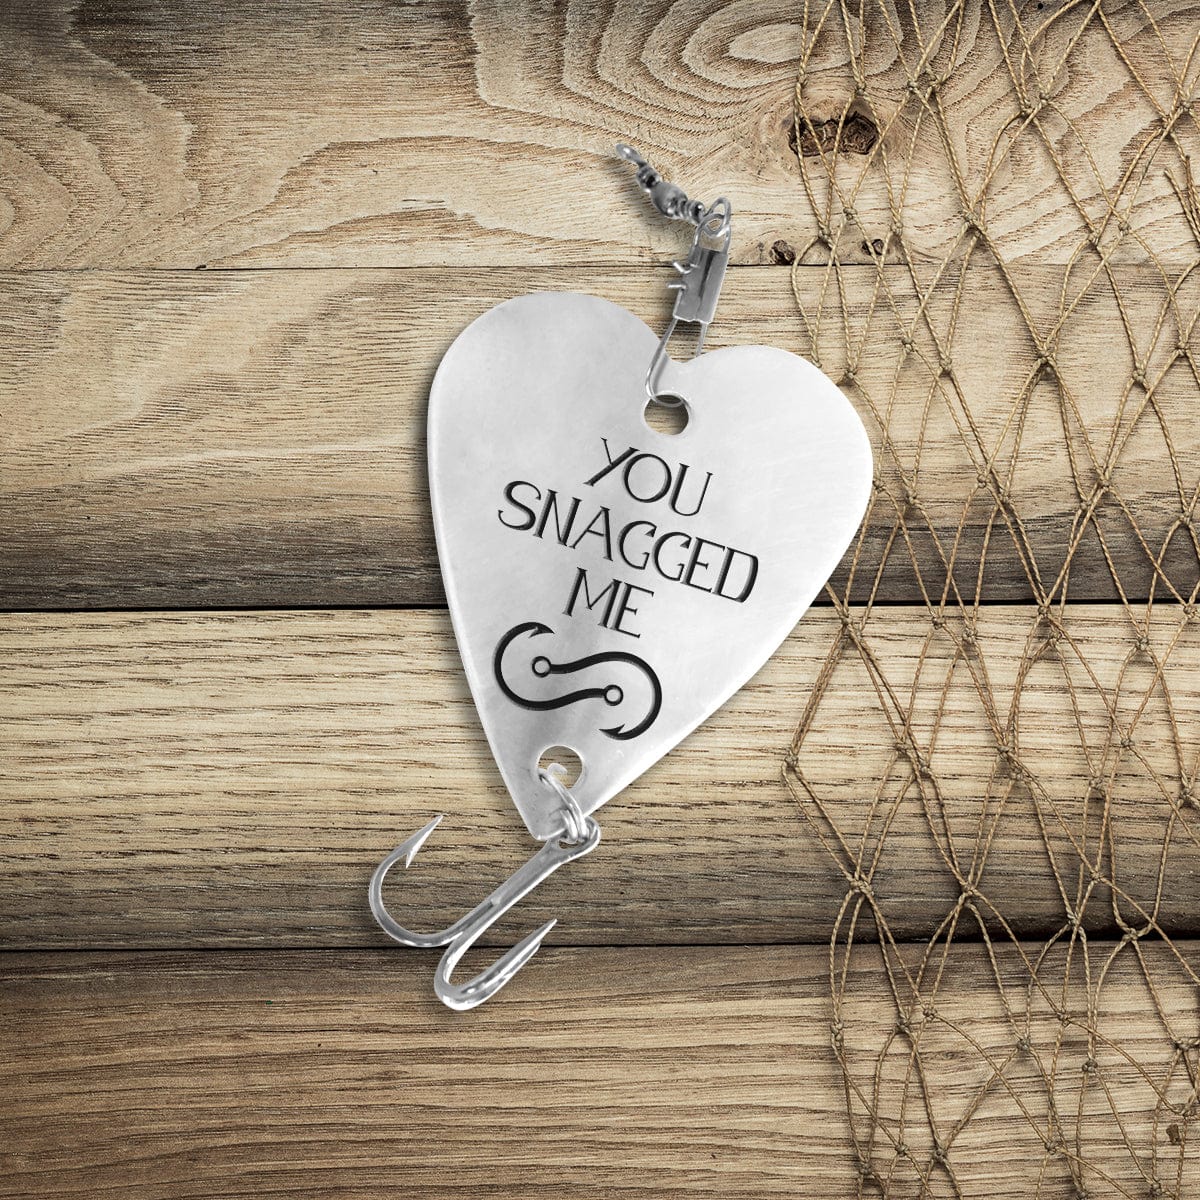 Fishing Lure - To My Wife - You Are The Love Of My Life - Gfb15002   Romantic christmas gifts, Boyfriend gifts, Gifts for your boyfriend